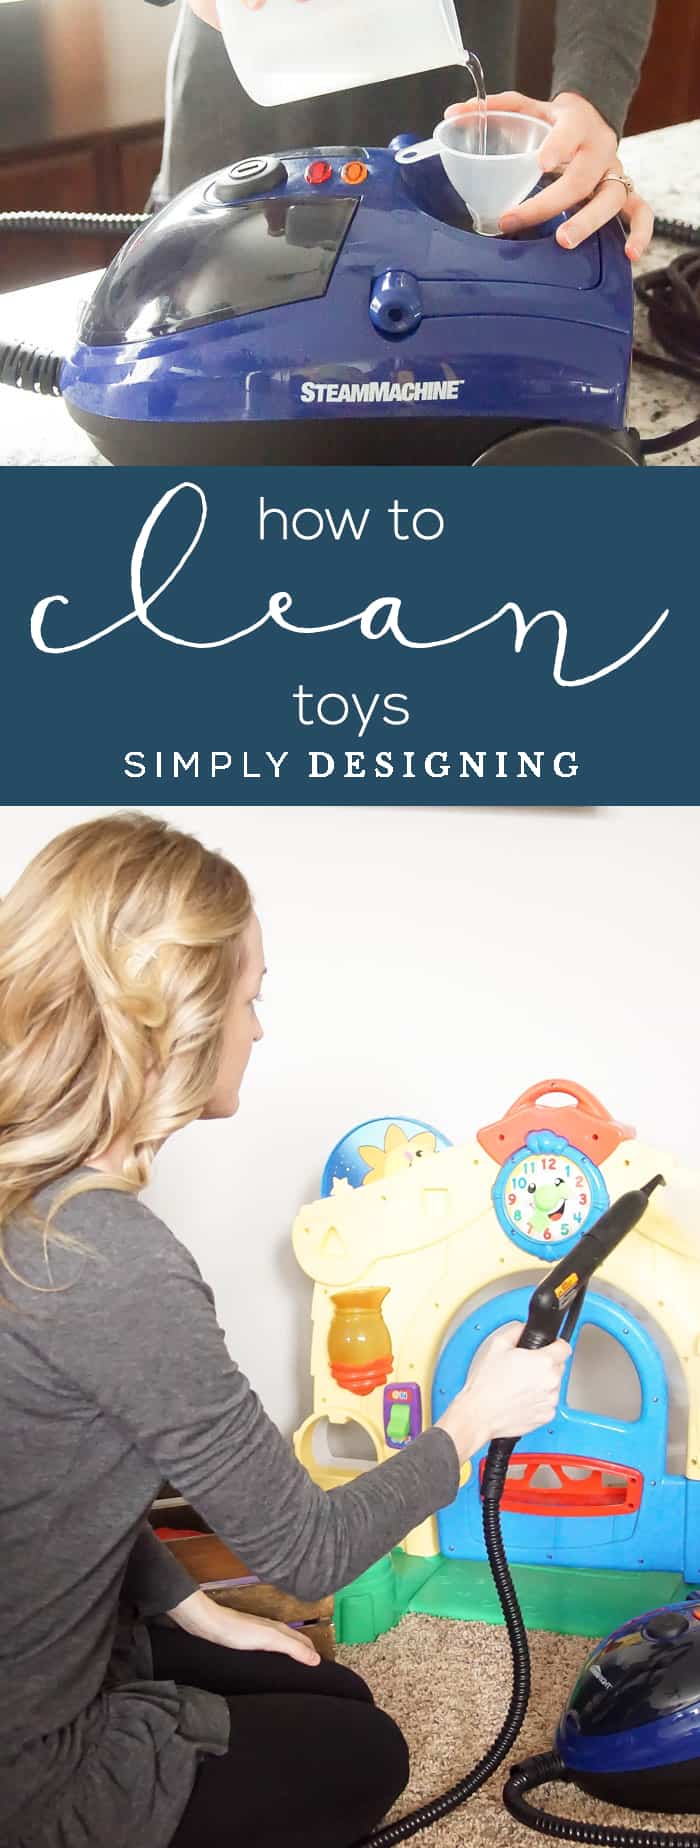 How to Clean Toys - The Best Way to Clean Baby Toys - How do you sanitize toys - How to clean baby toys that cant be washed